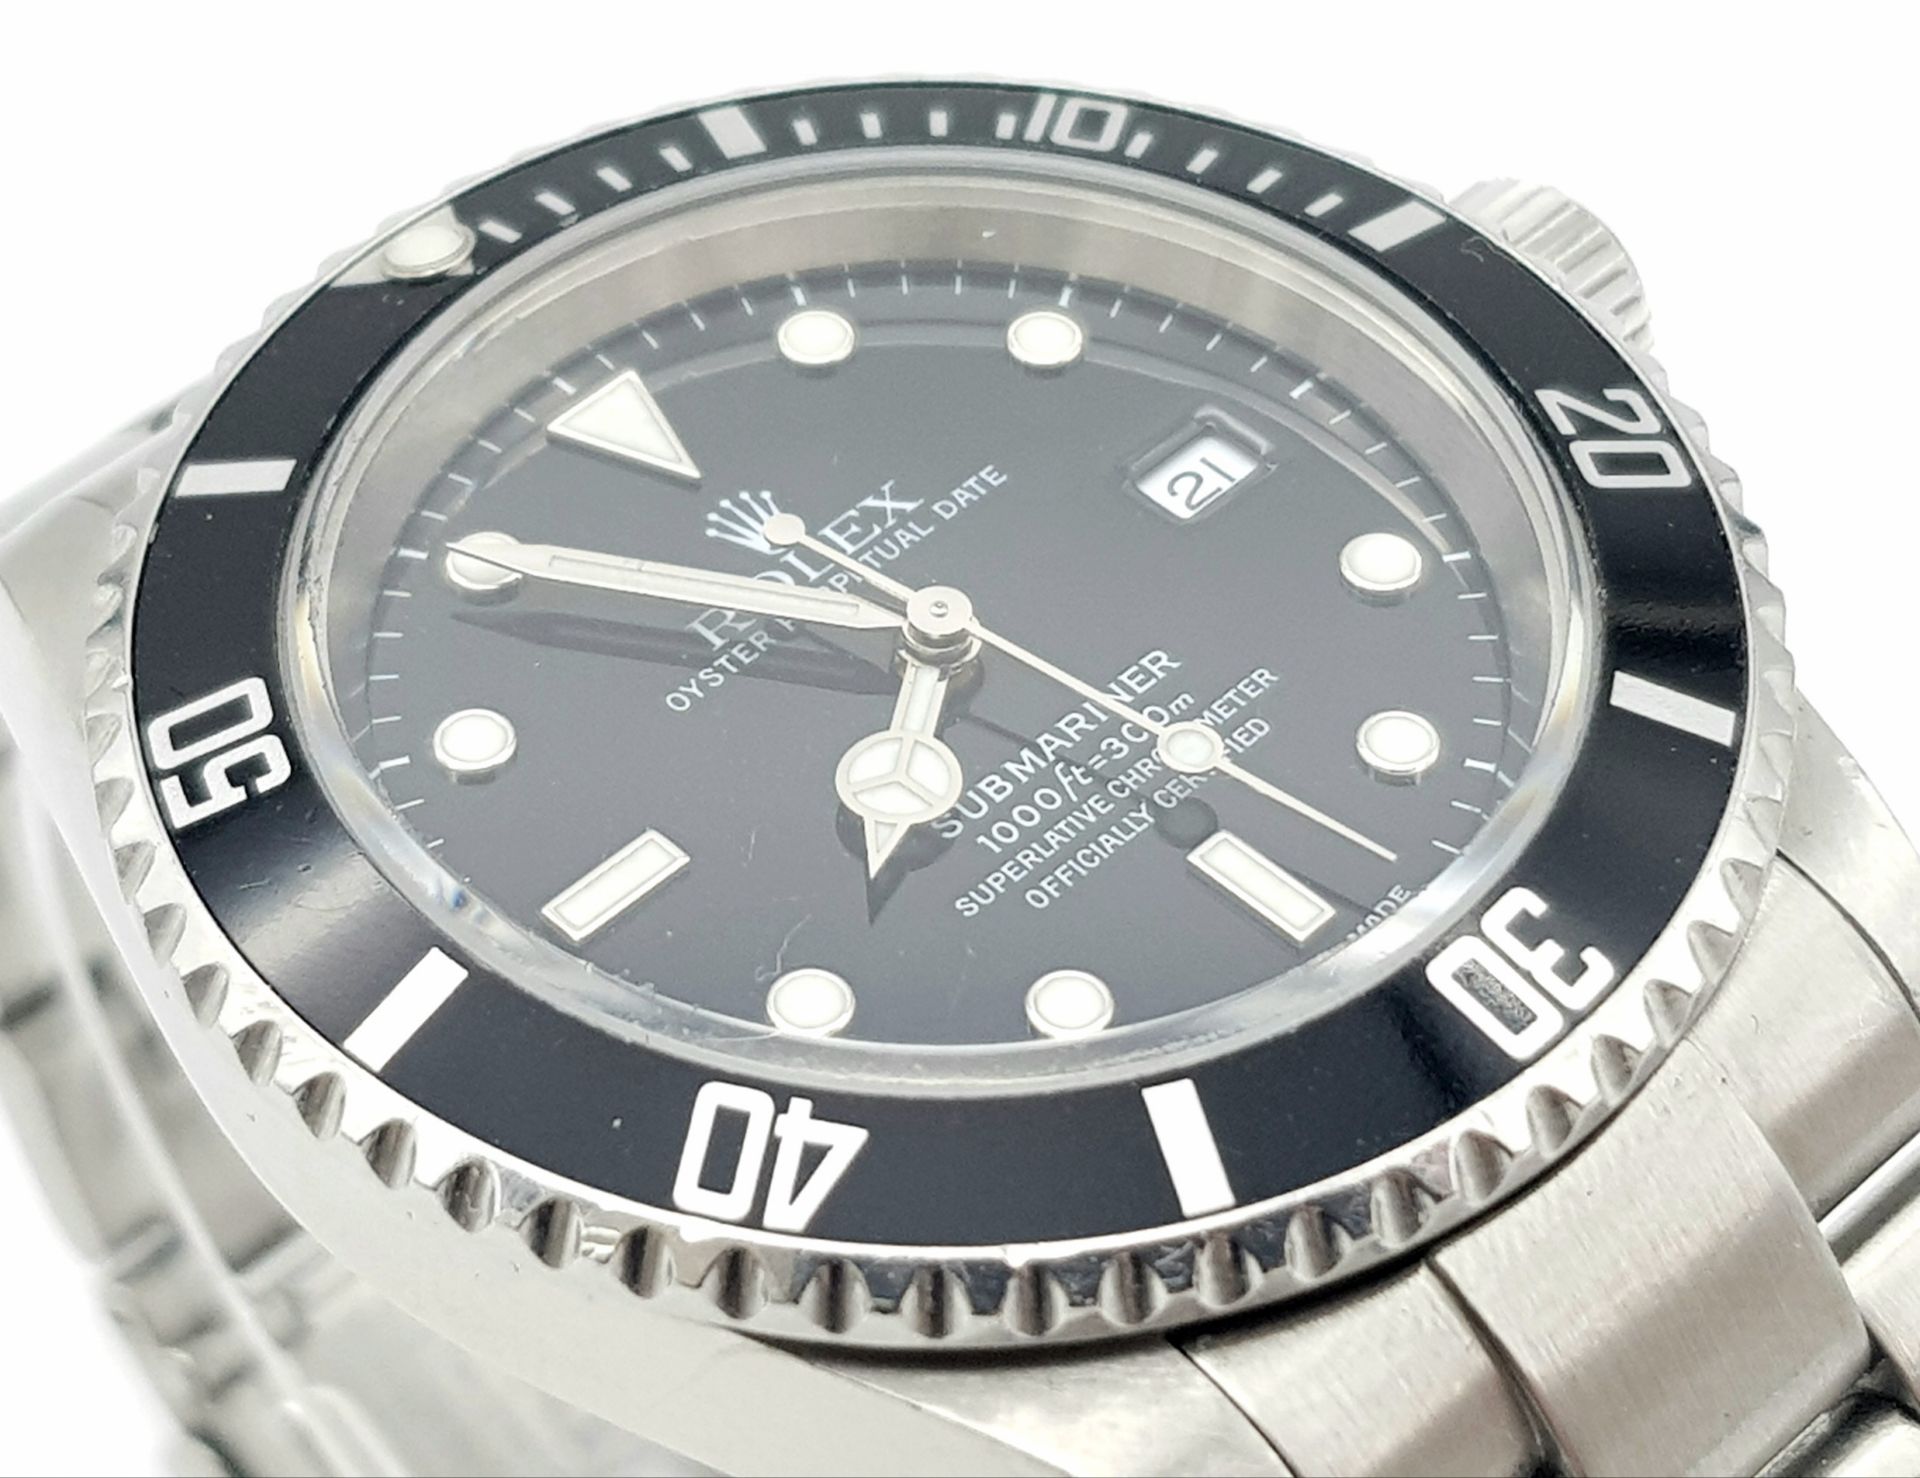 A Rolex Submariner Oyster Perpetual Date Watch. Stainless steel bracelet and case - 40mm. Black dial - Image 4 of 8